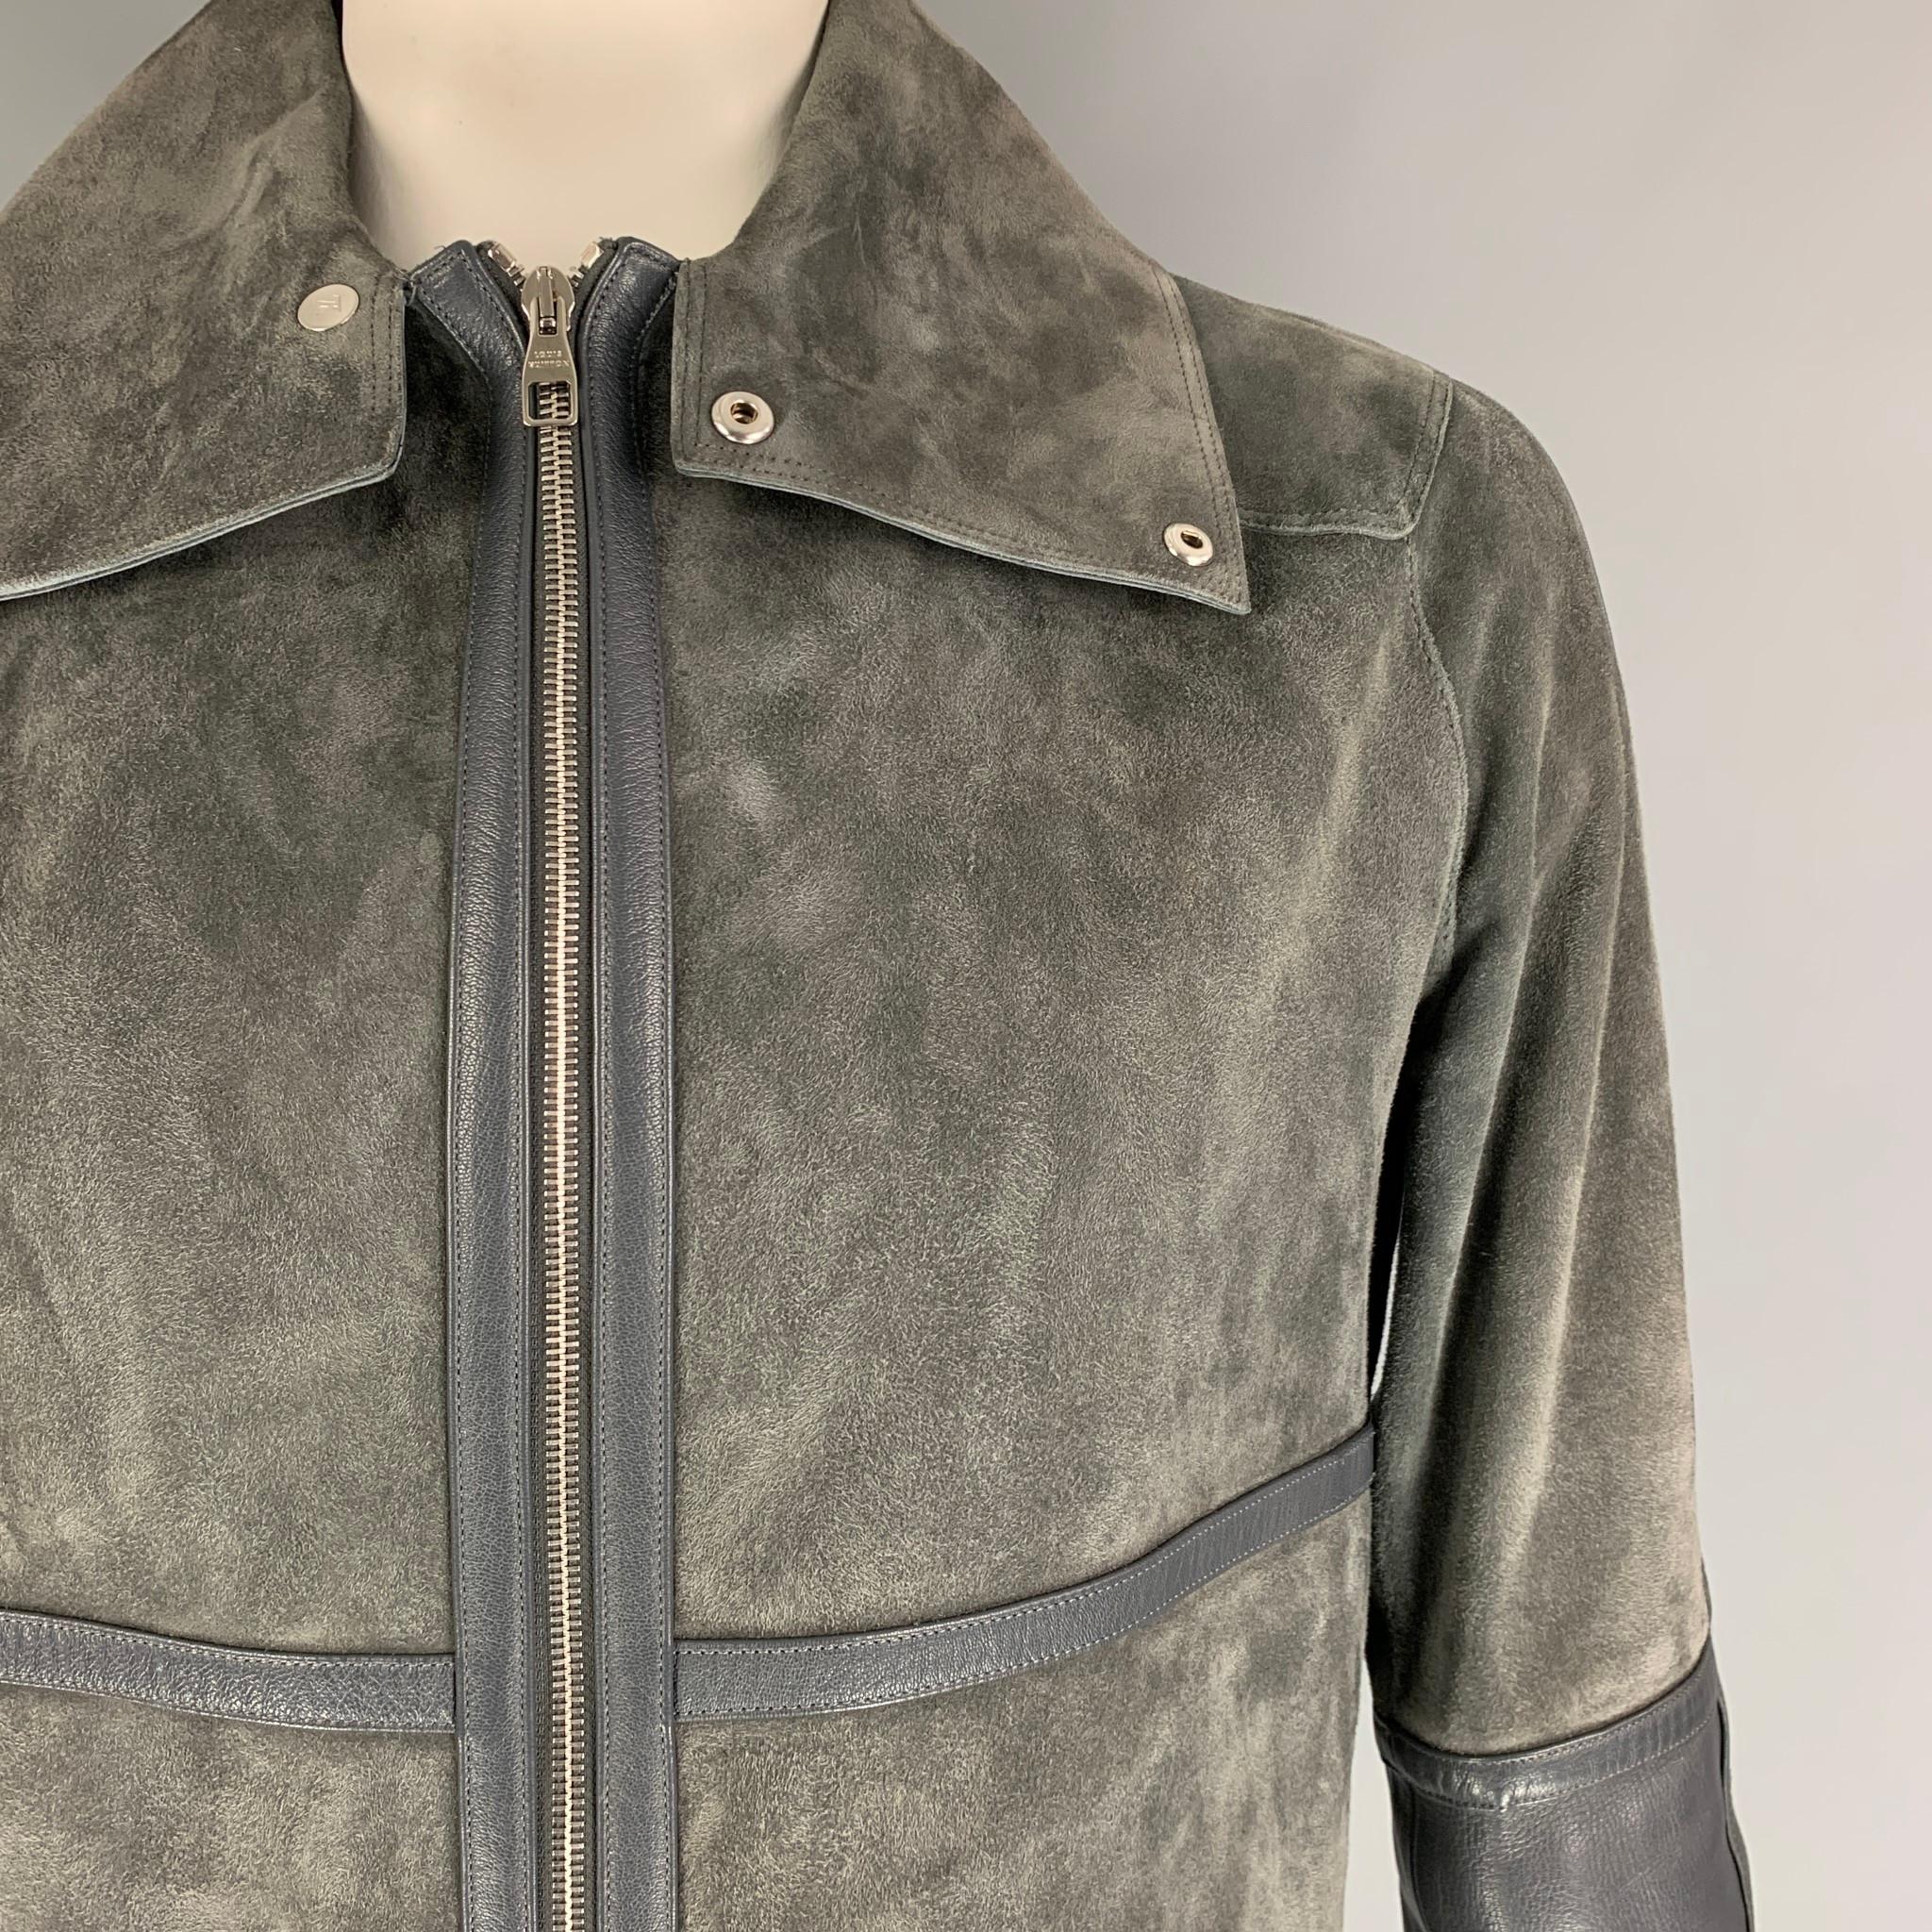 Louis Vuitton Leather Jackets - 7 For Sale on 1stDibs | lv leather jacket, lv  leather jacket price, louis vuitton leather jacket price